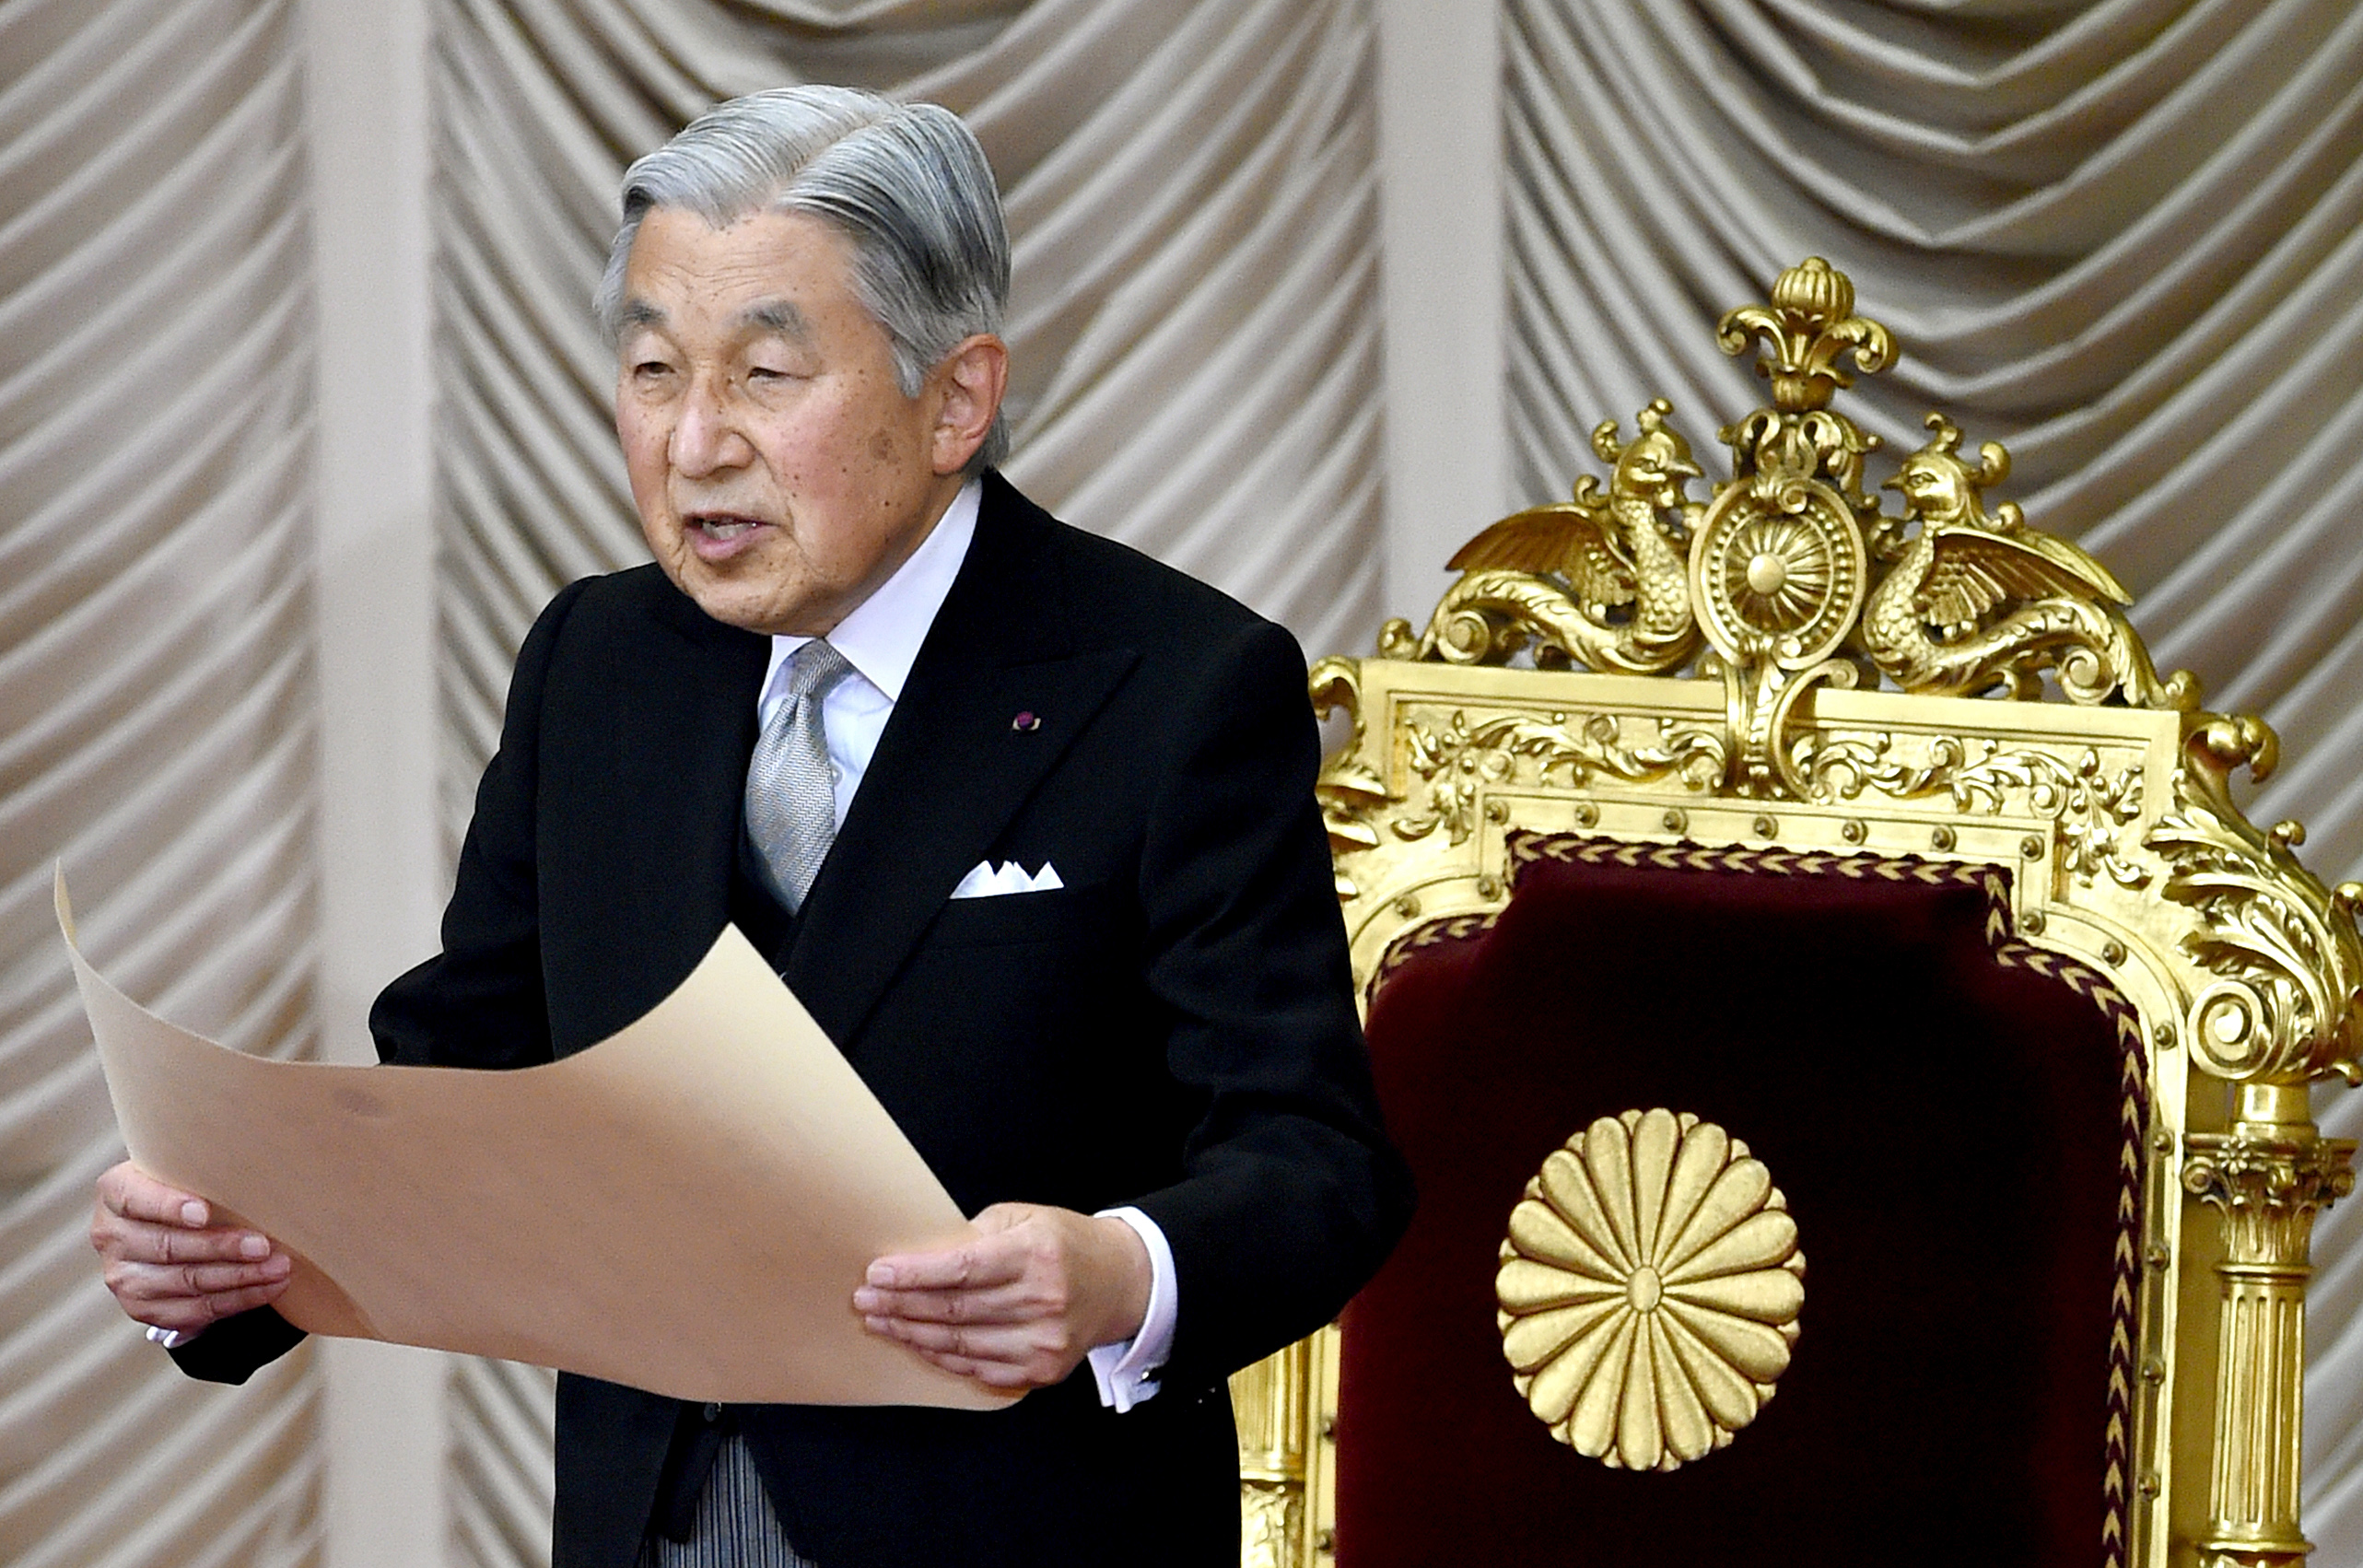 Japanese Emperor Akihito delivers his opening address for the extraordinary Diet session at the National Diet in Tokyo on August 1, 2016. / AFP PHOTO / TORU YAMANAKA